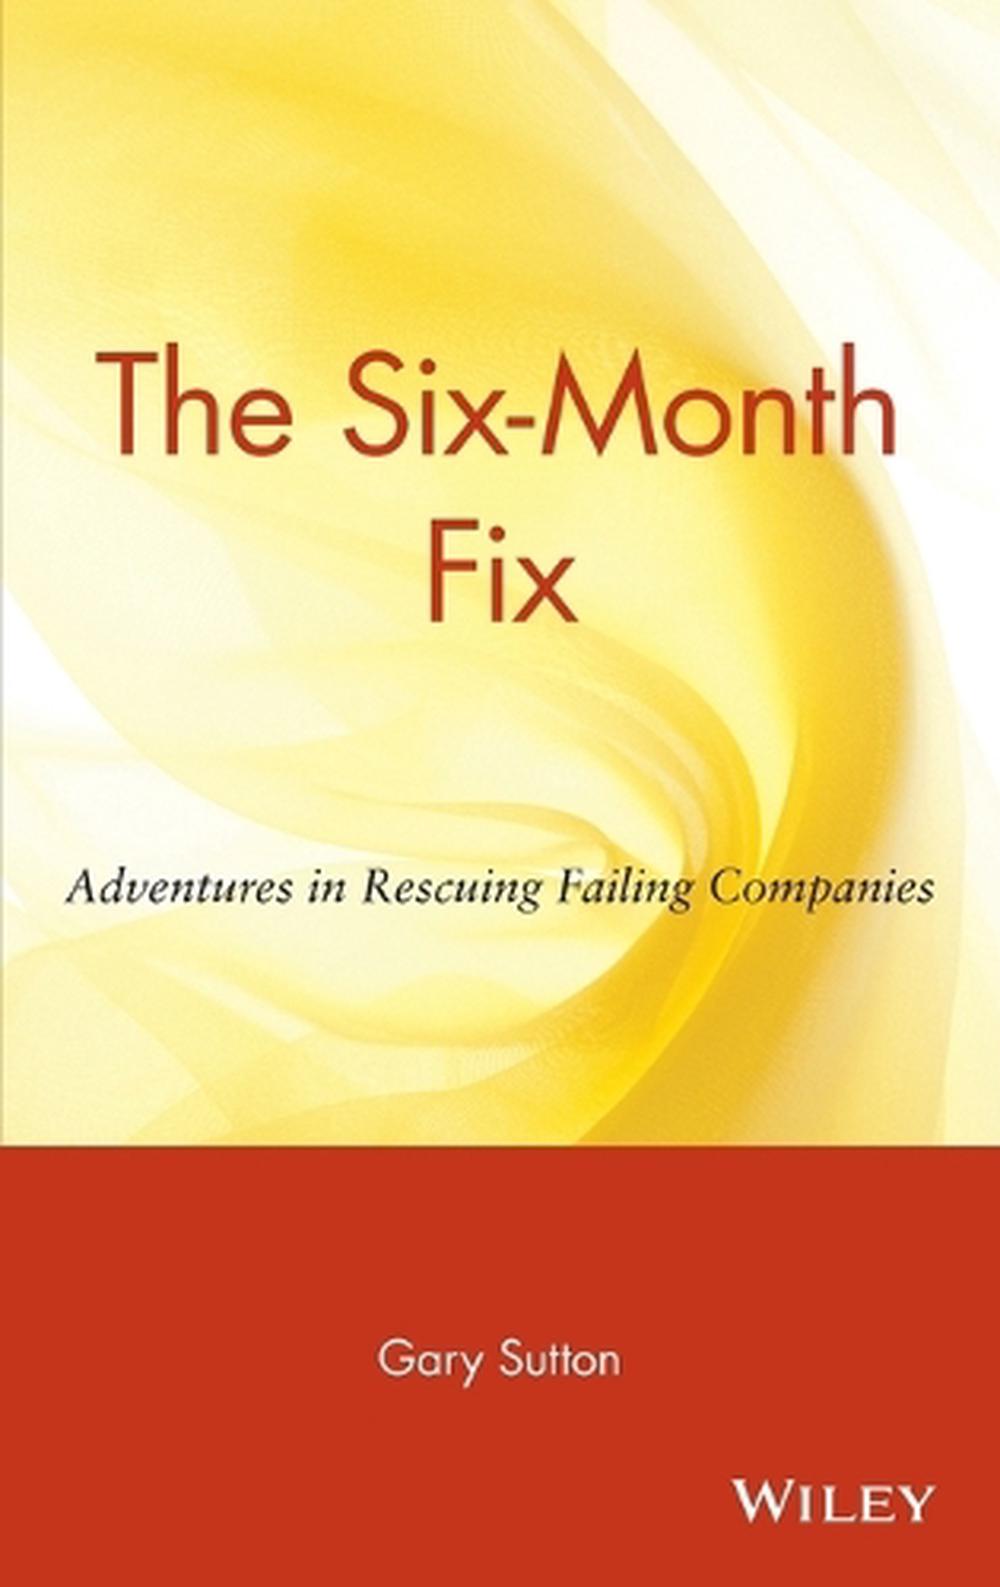 The Six Month Fix Adventures in Rescuing Failing Companies by Gary